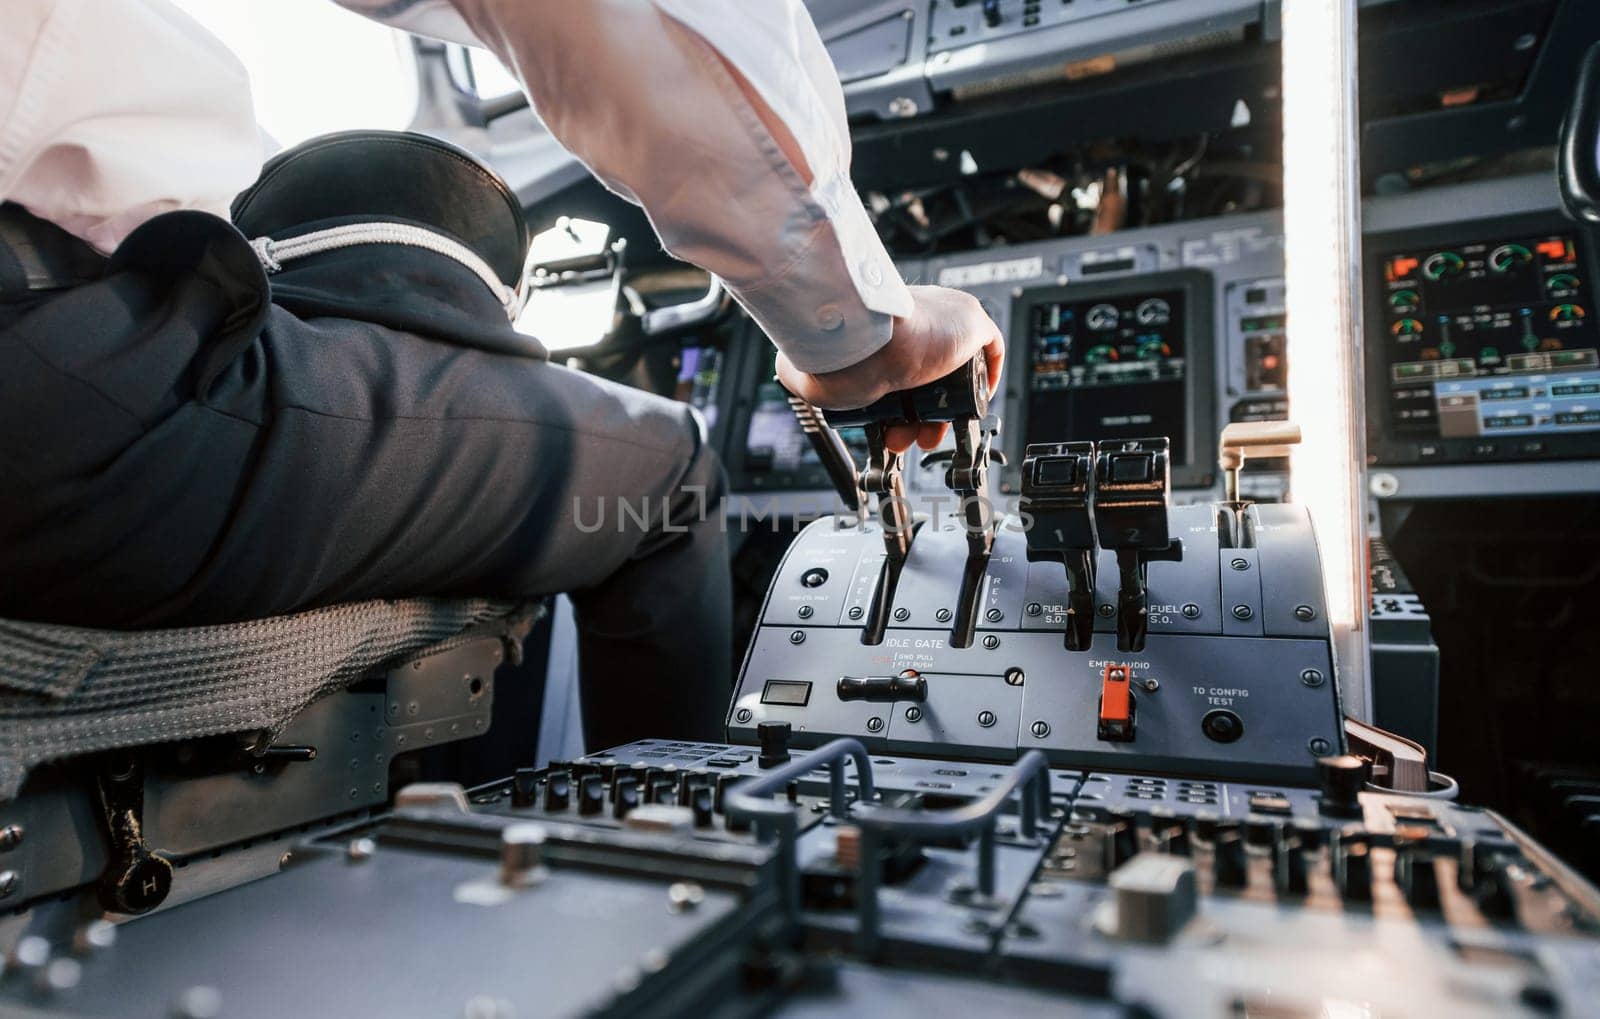 Control of the flight. Pilot on the work in the passenger airplane. Preparing for takeoff.